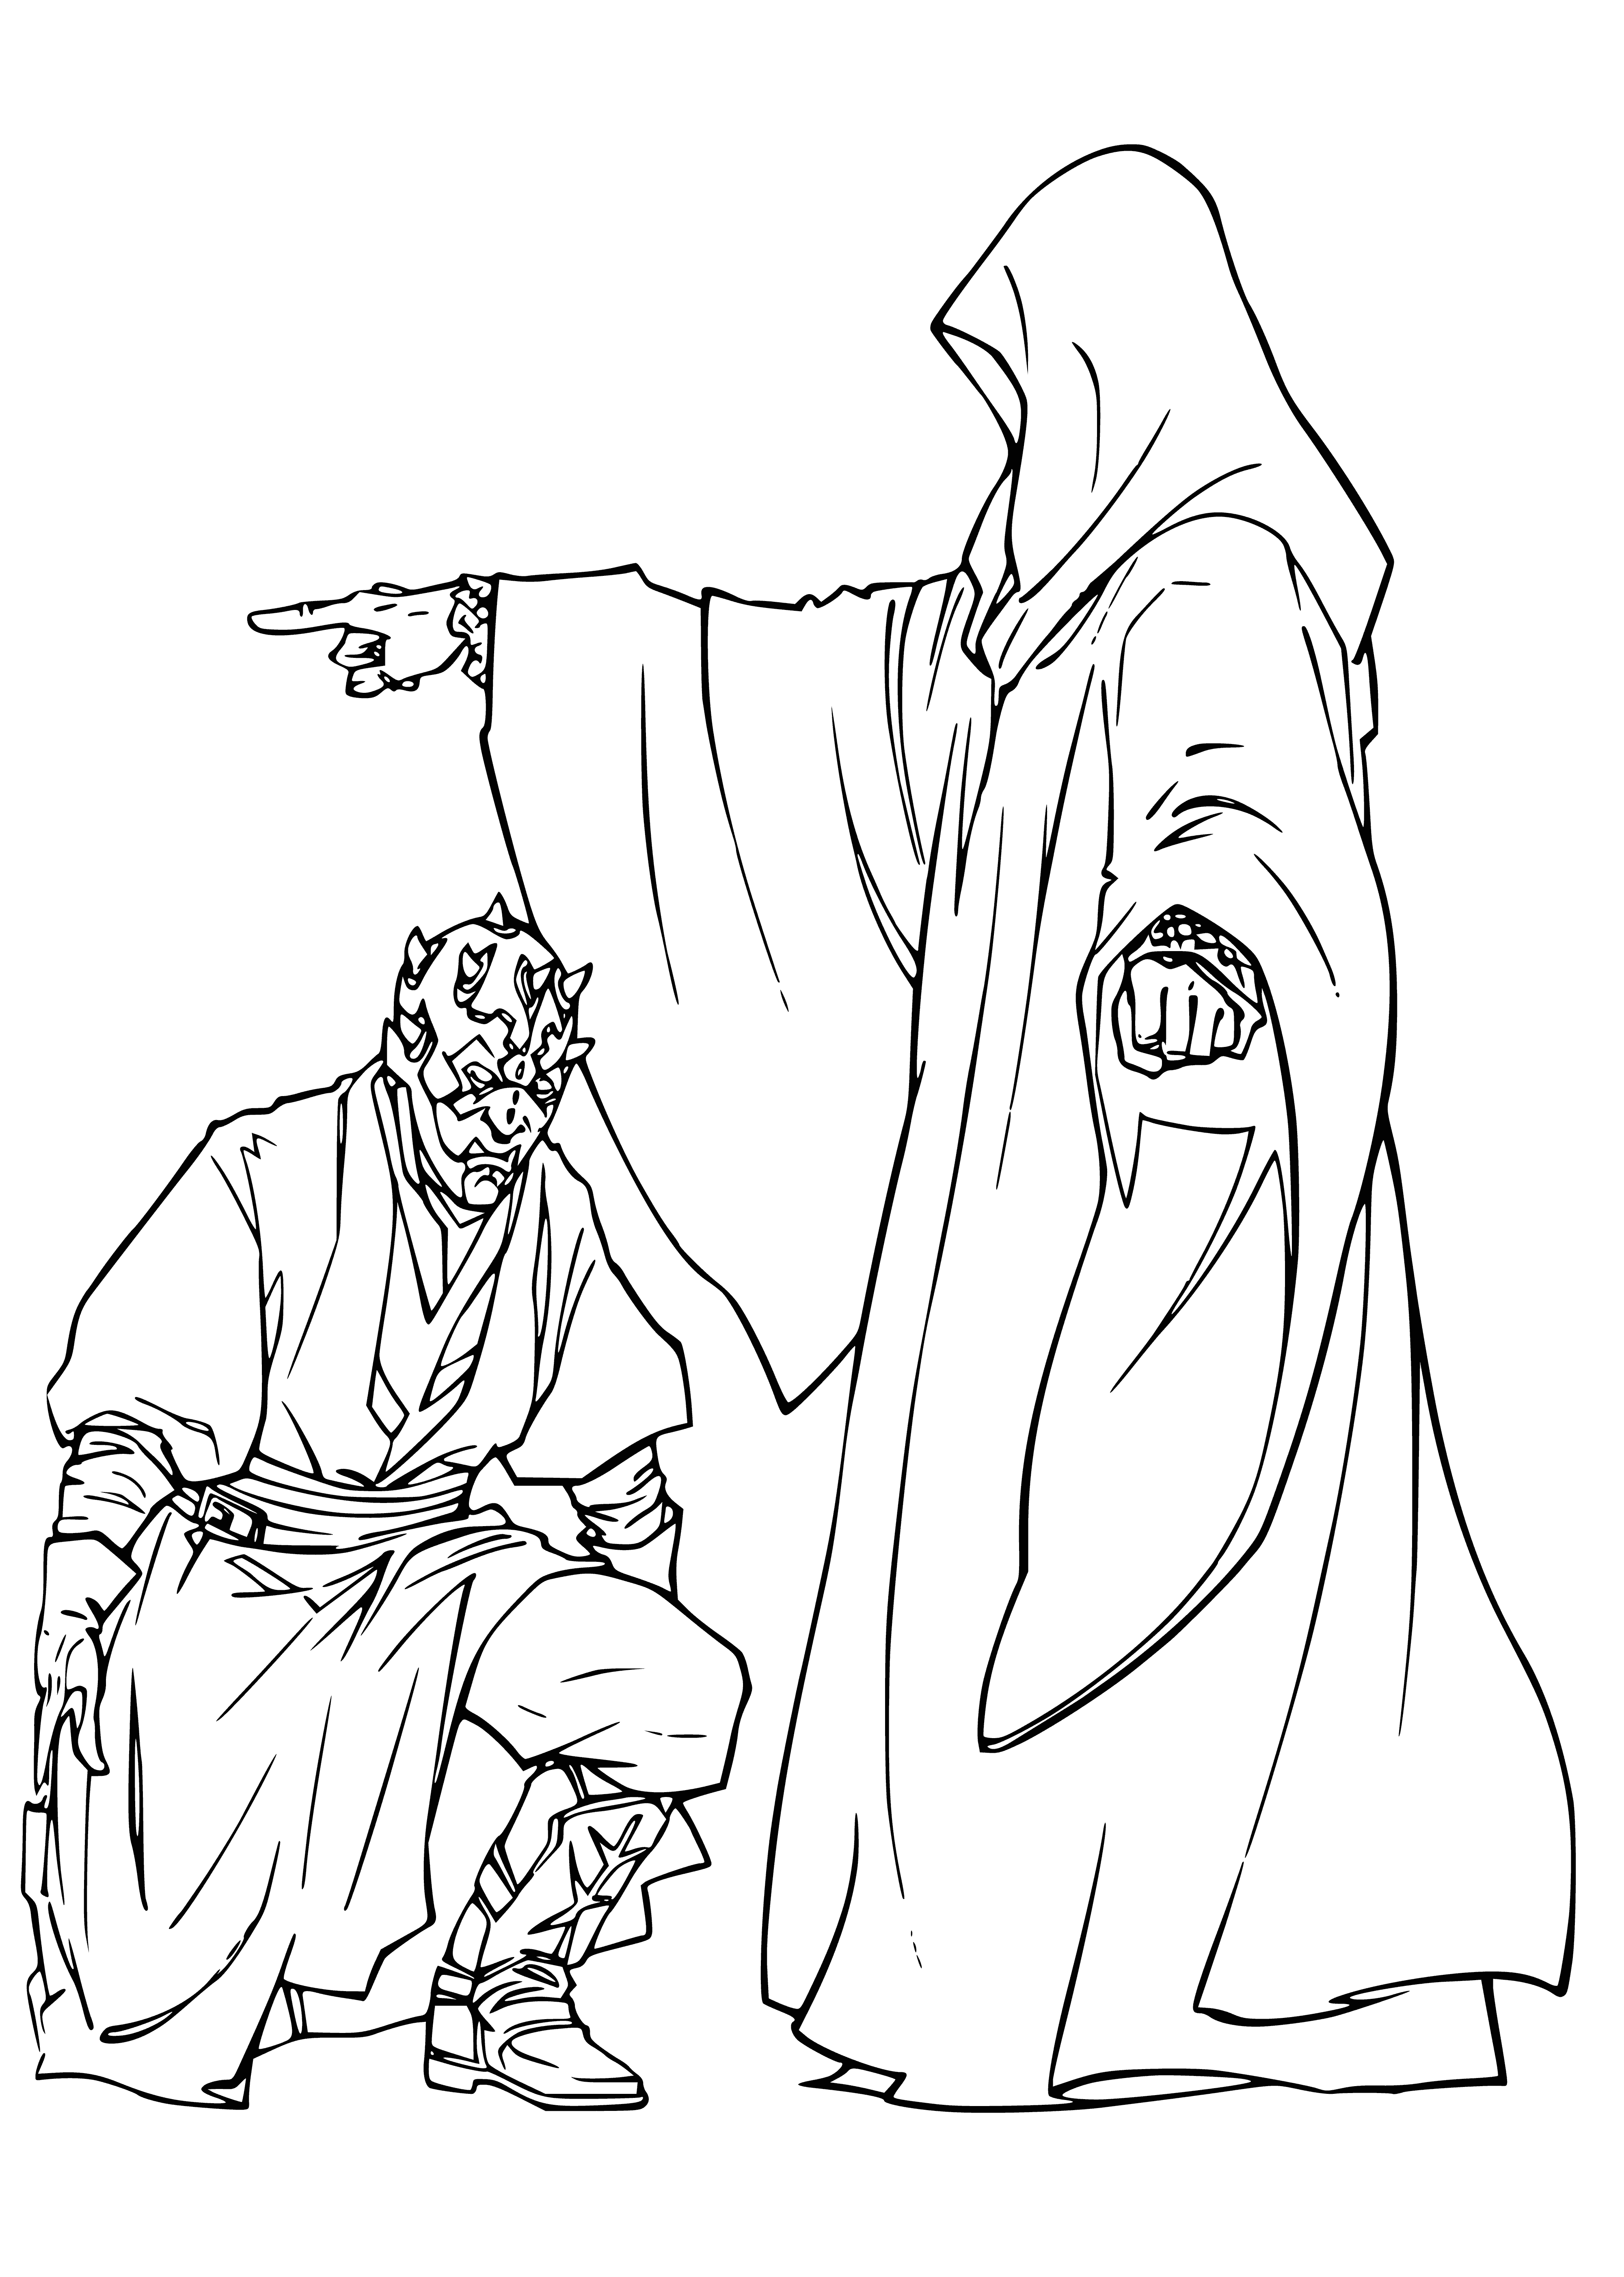 The Sith Lord and Darth Maul coloring page